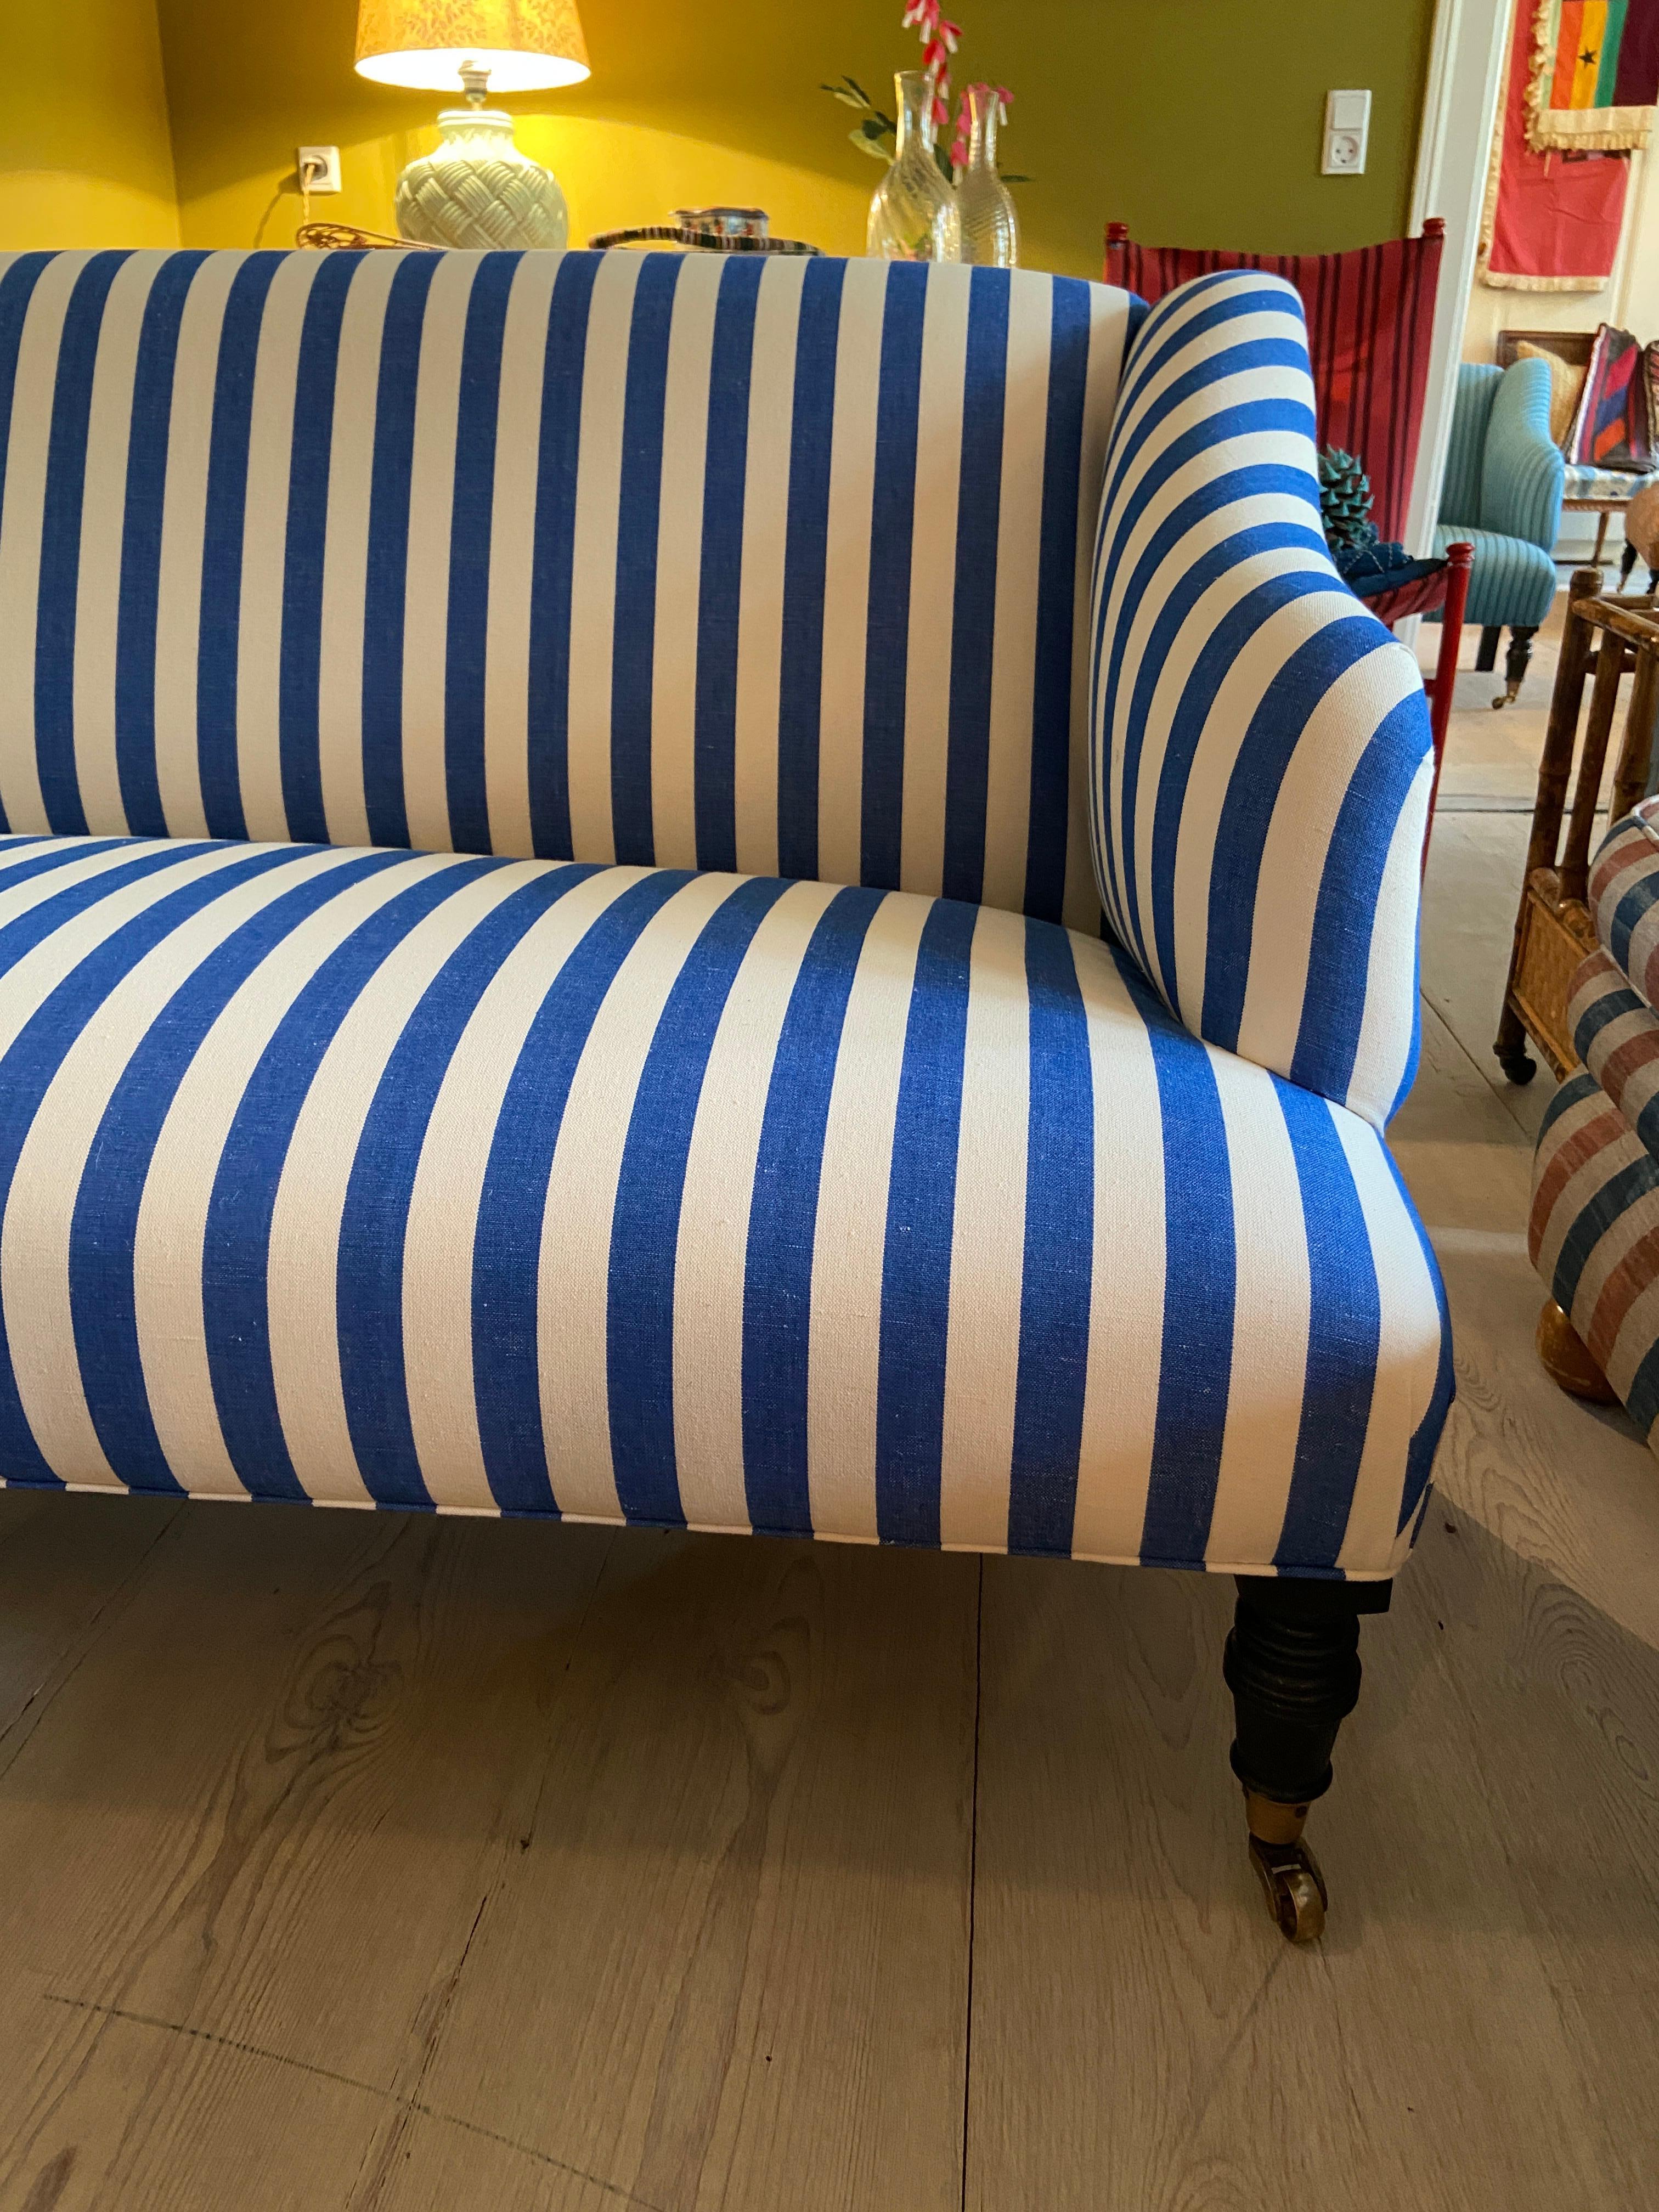 Contemporary Sofa in Customized Blue Striped Upholstery, Belgium, 2020s In New Condition For Sale In Copenhagen K, DK